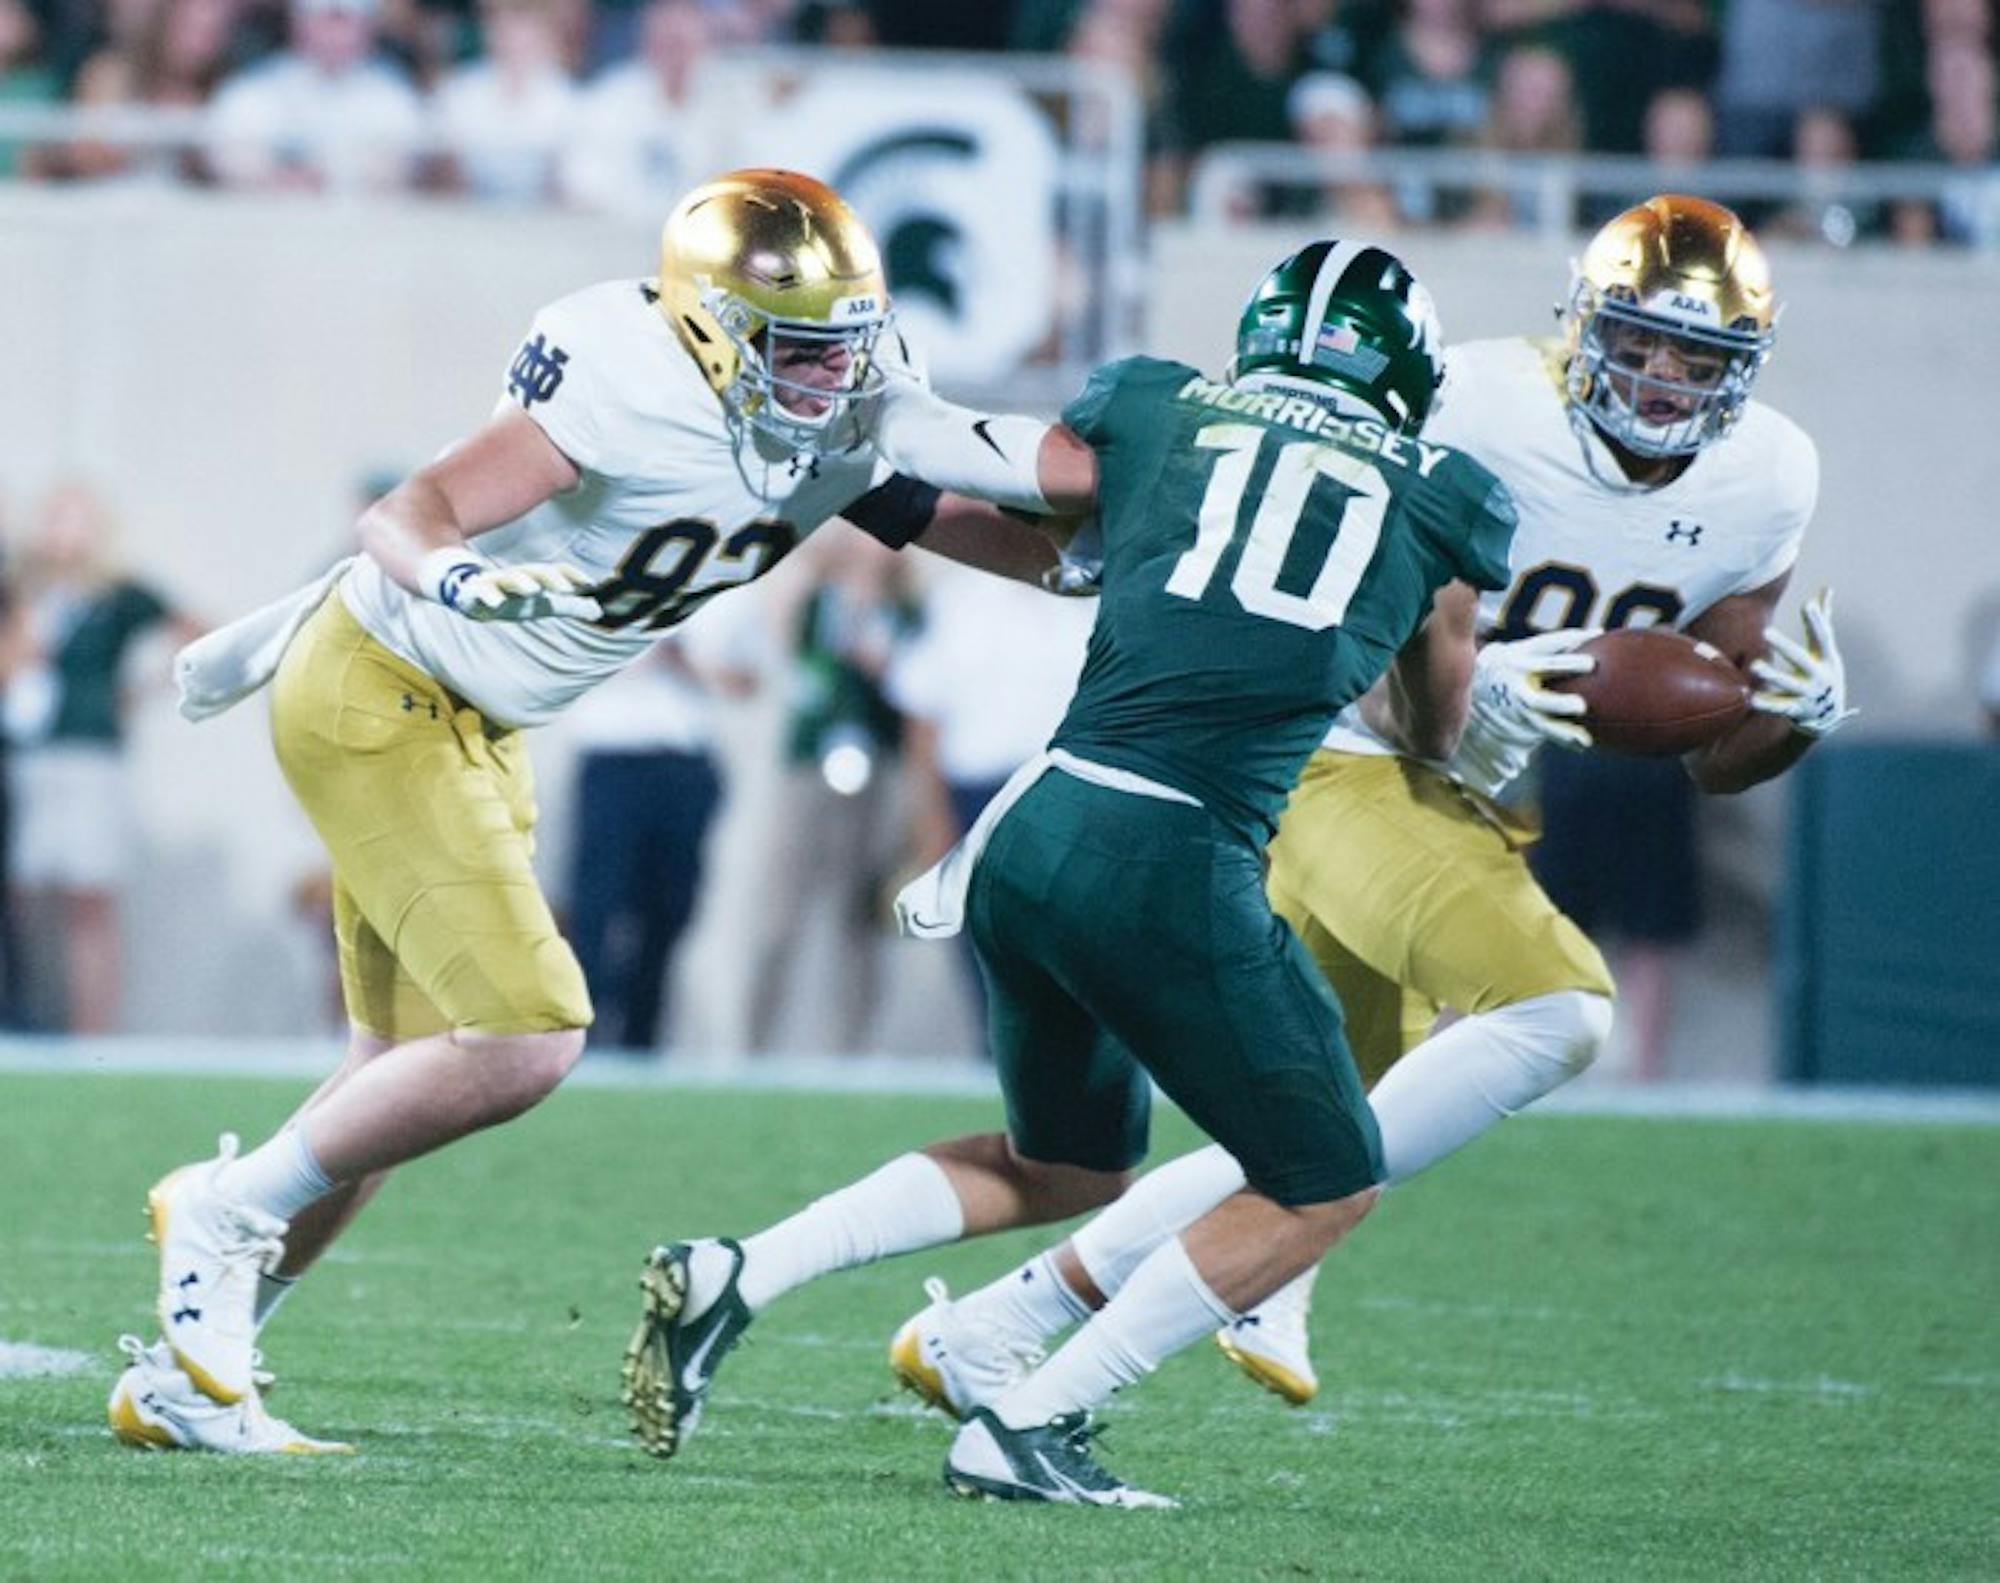 Irish junior tight end Alize Mack dodges a defender during Notre Dame's 38-18 win over Michigan State on Saturday in East Lansing, Michigan.